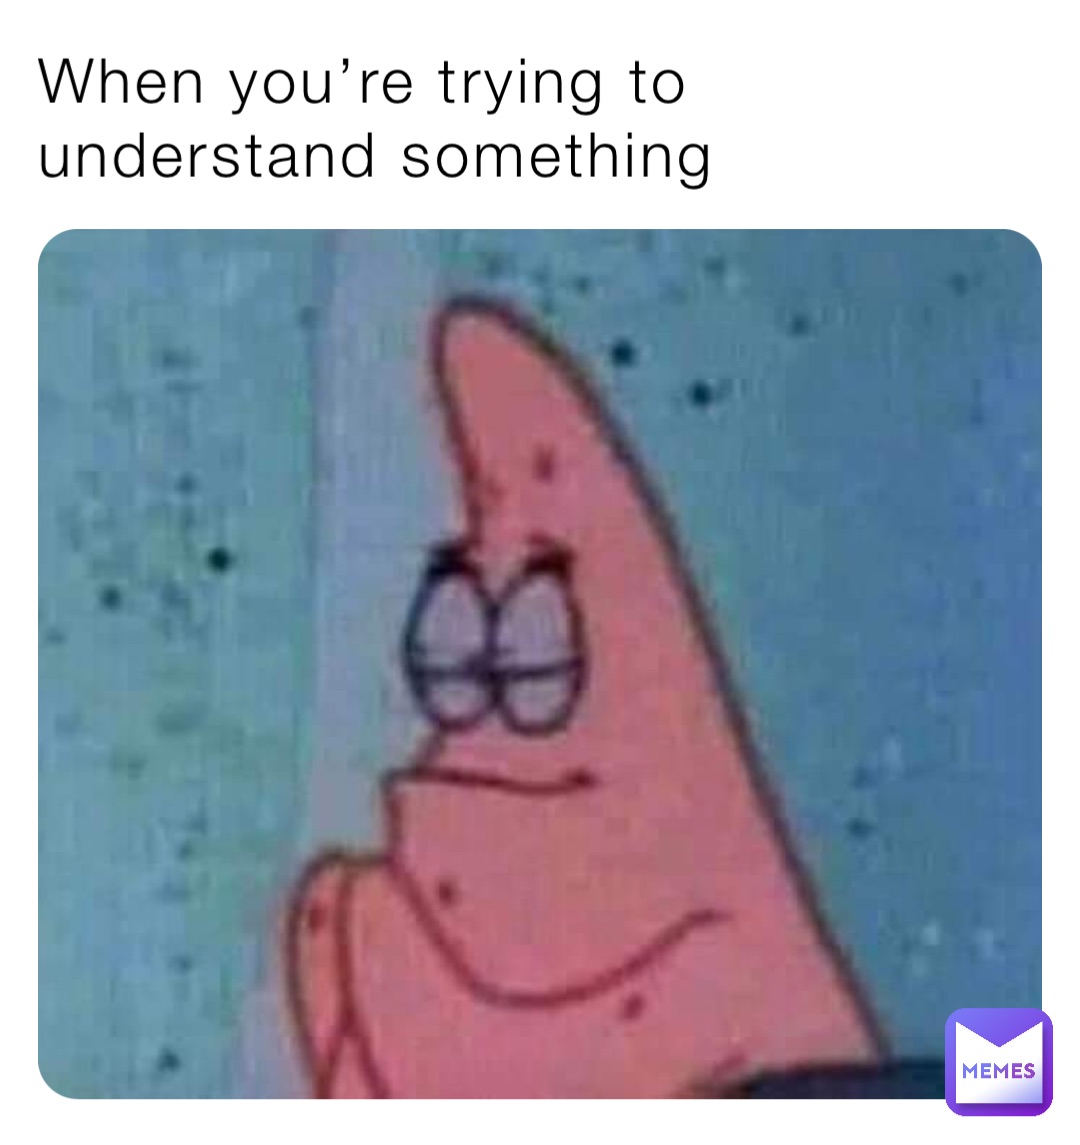 When you’re trying to understand something